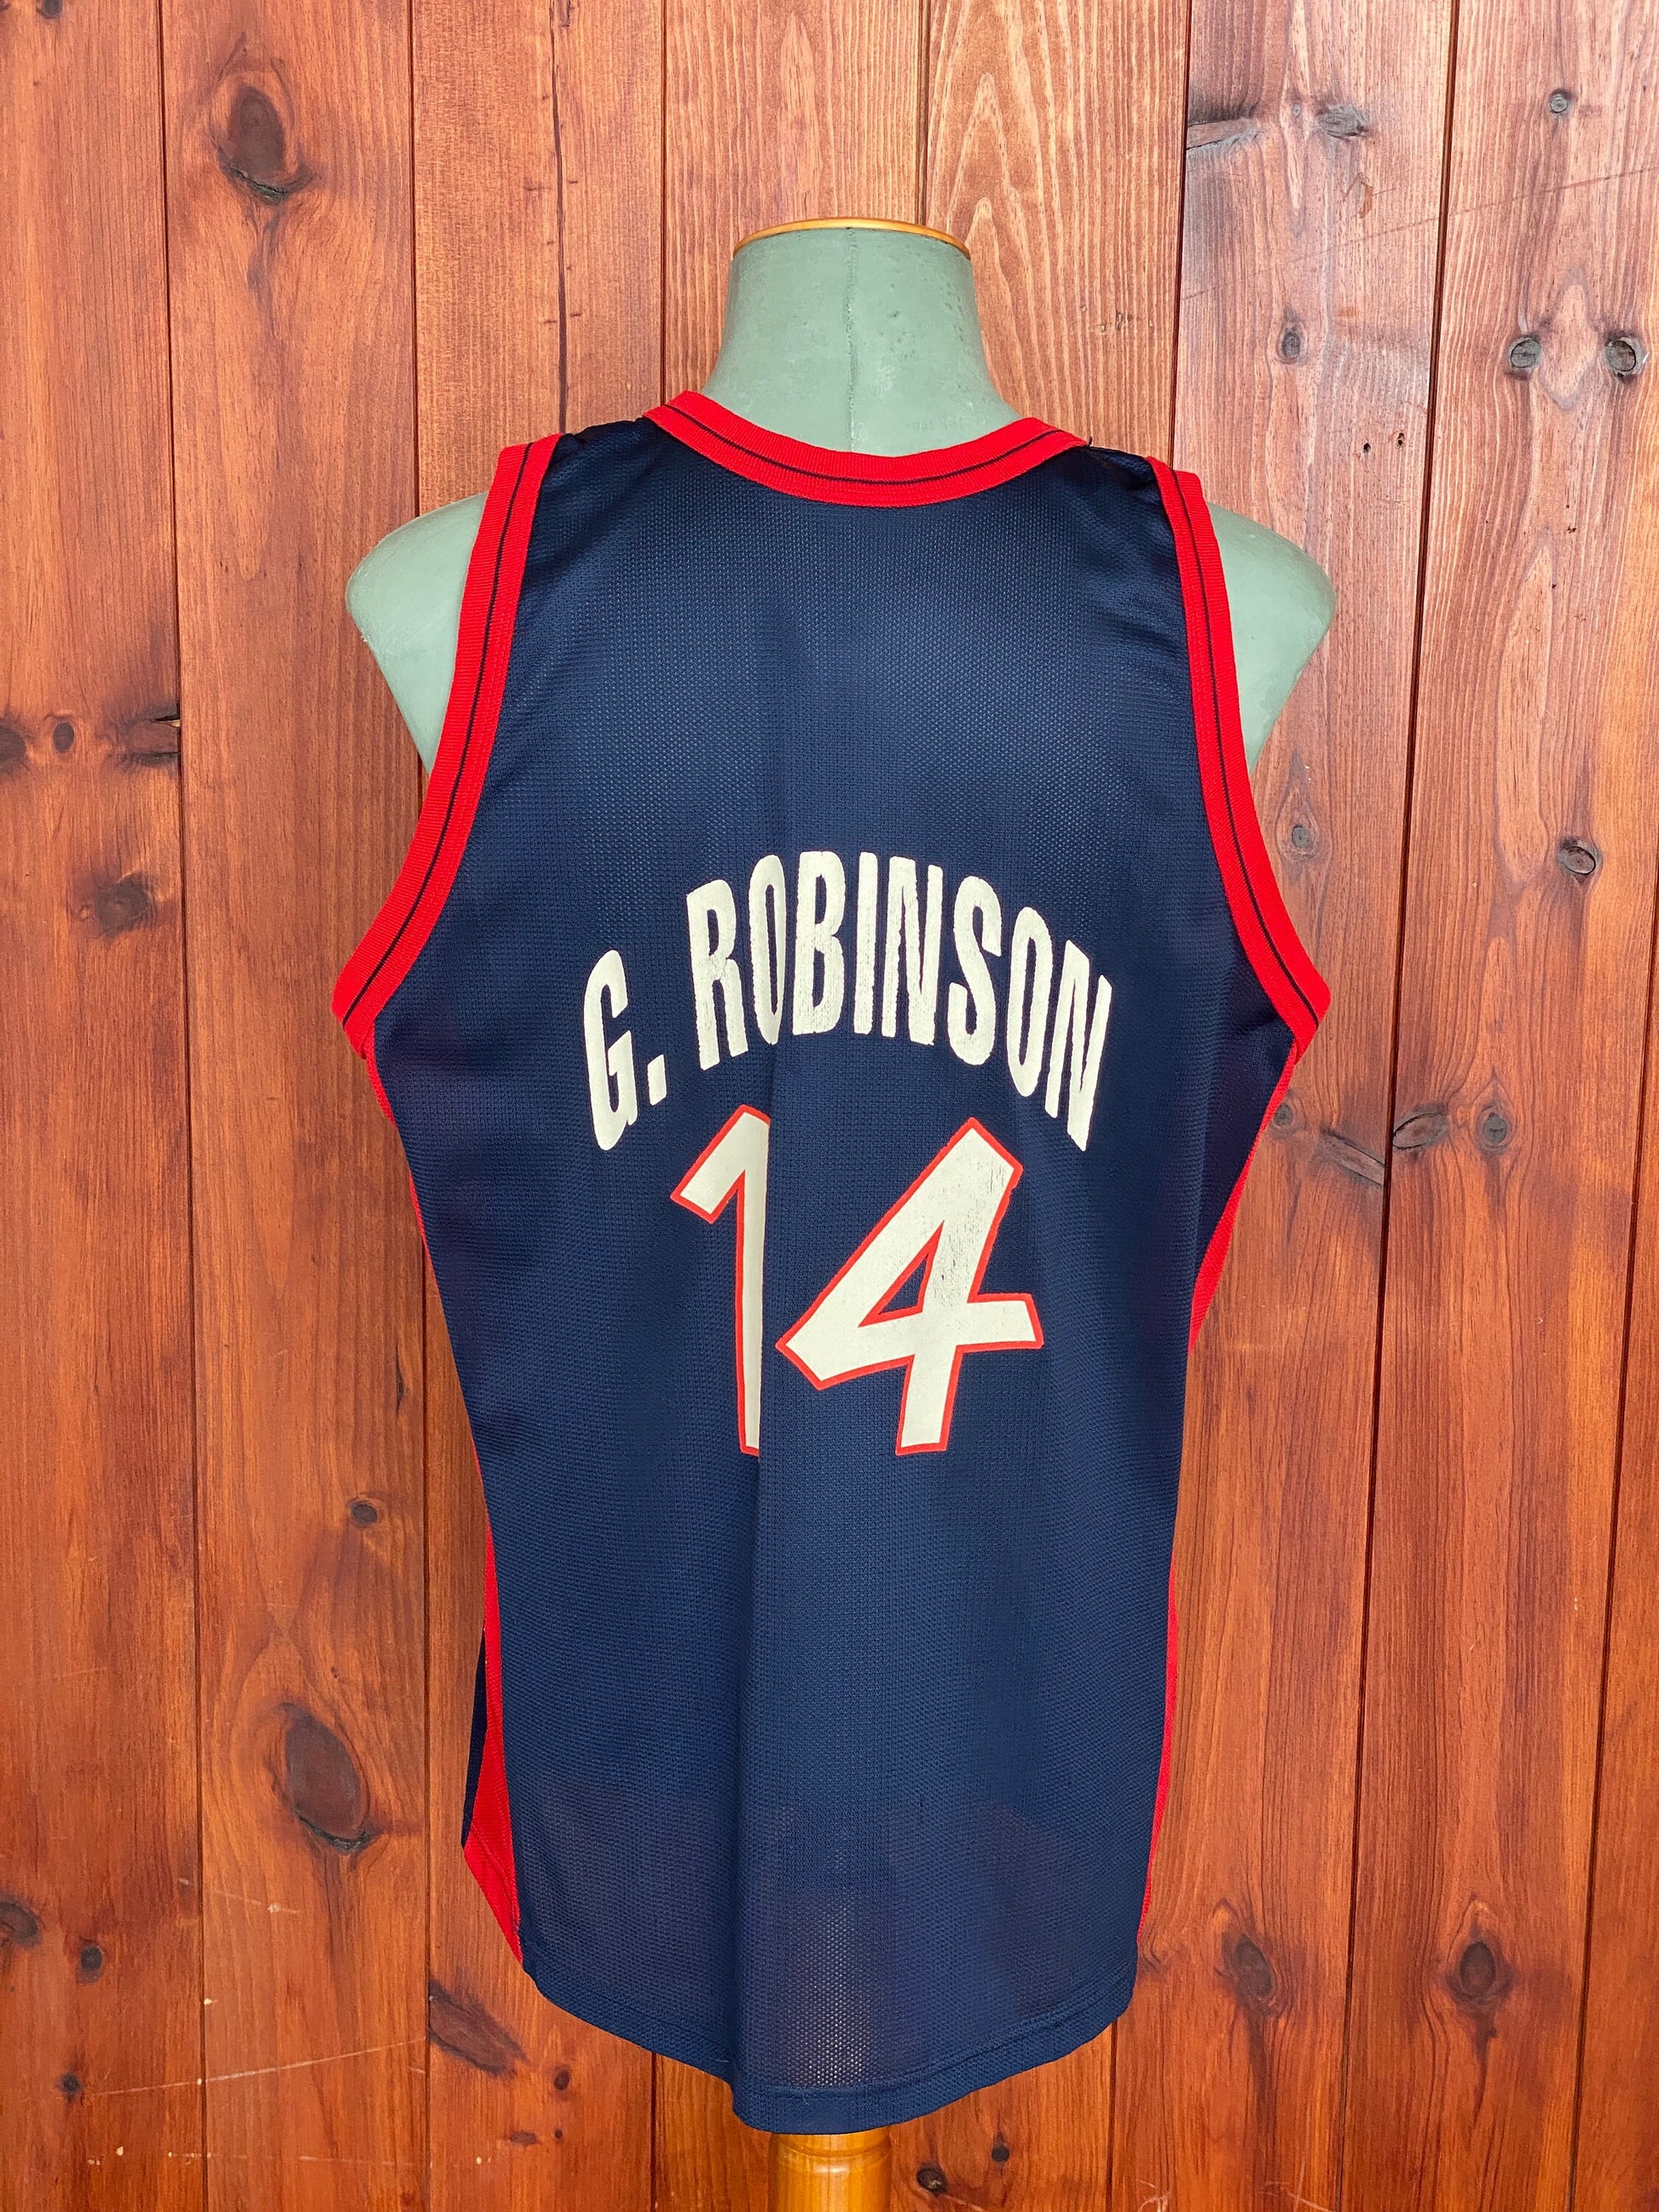 Size 48 David Robinson #14 Vintage Dream Team Olympic Champion NBA Jersey - Made in USA - back View